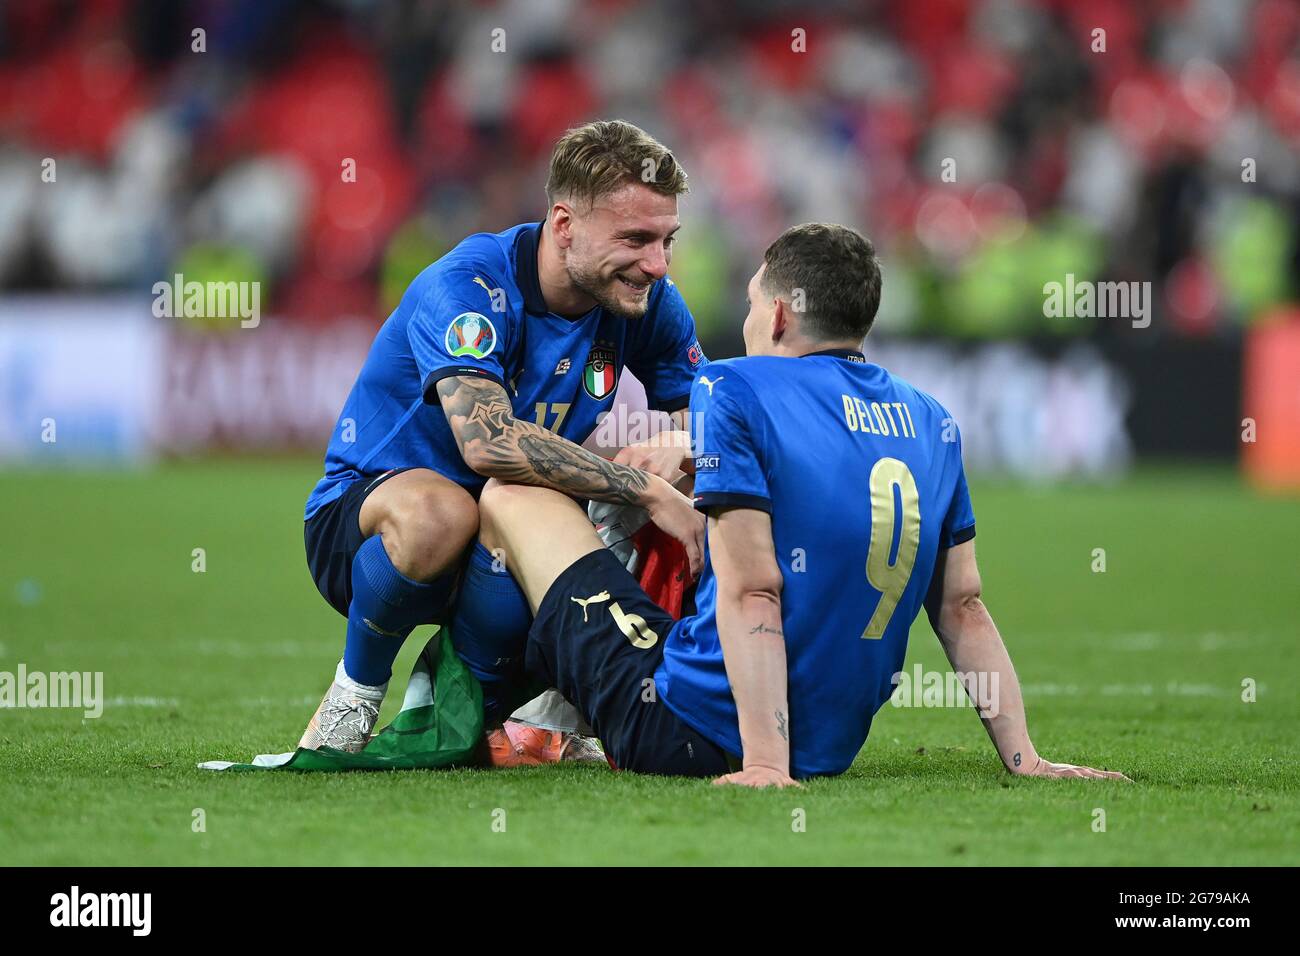 London, UK. 12th July, 2021. Ciro IMMOBILE (ITA) with Andrea BELOTTI (ITA)  after the end of the game. Final, game M51, Italy (ITA) - England (ENG) 4-3  iE on 07/11/2021 in London/Wembley